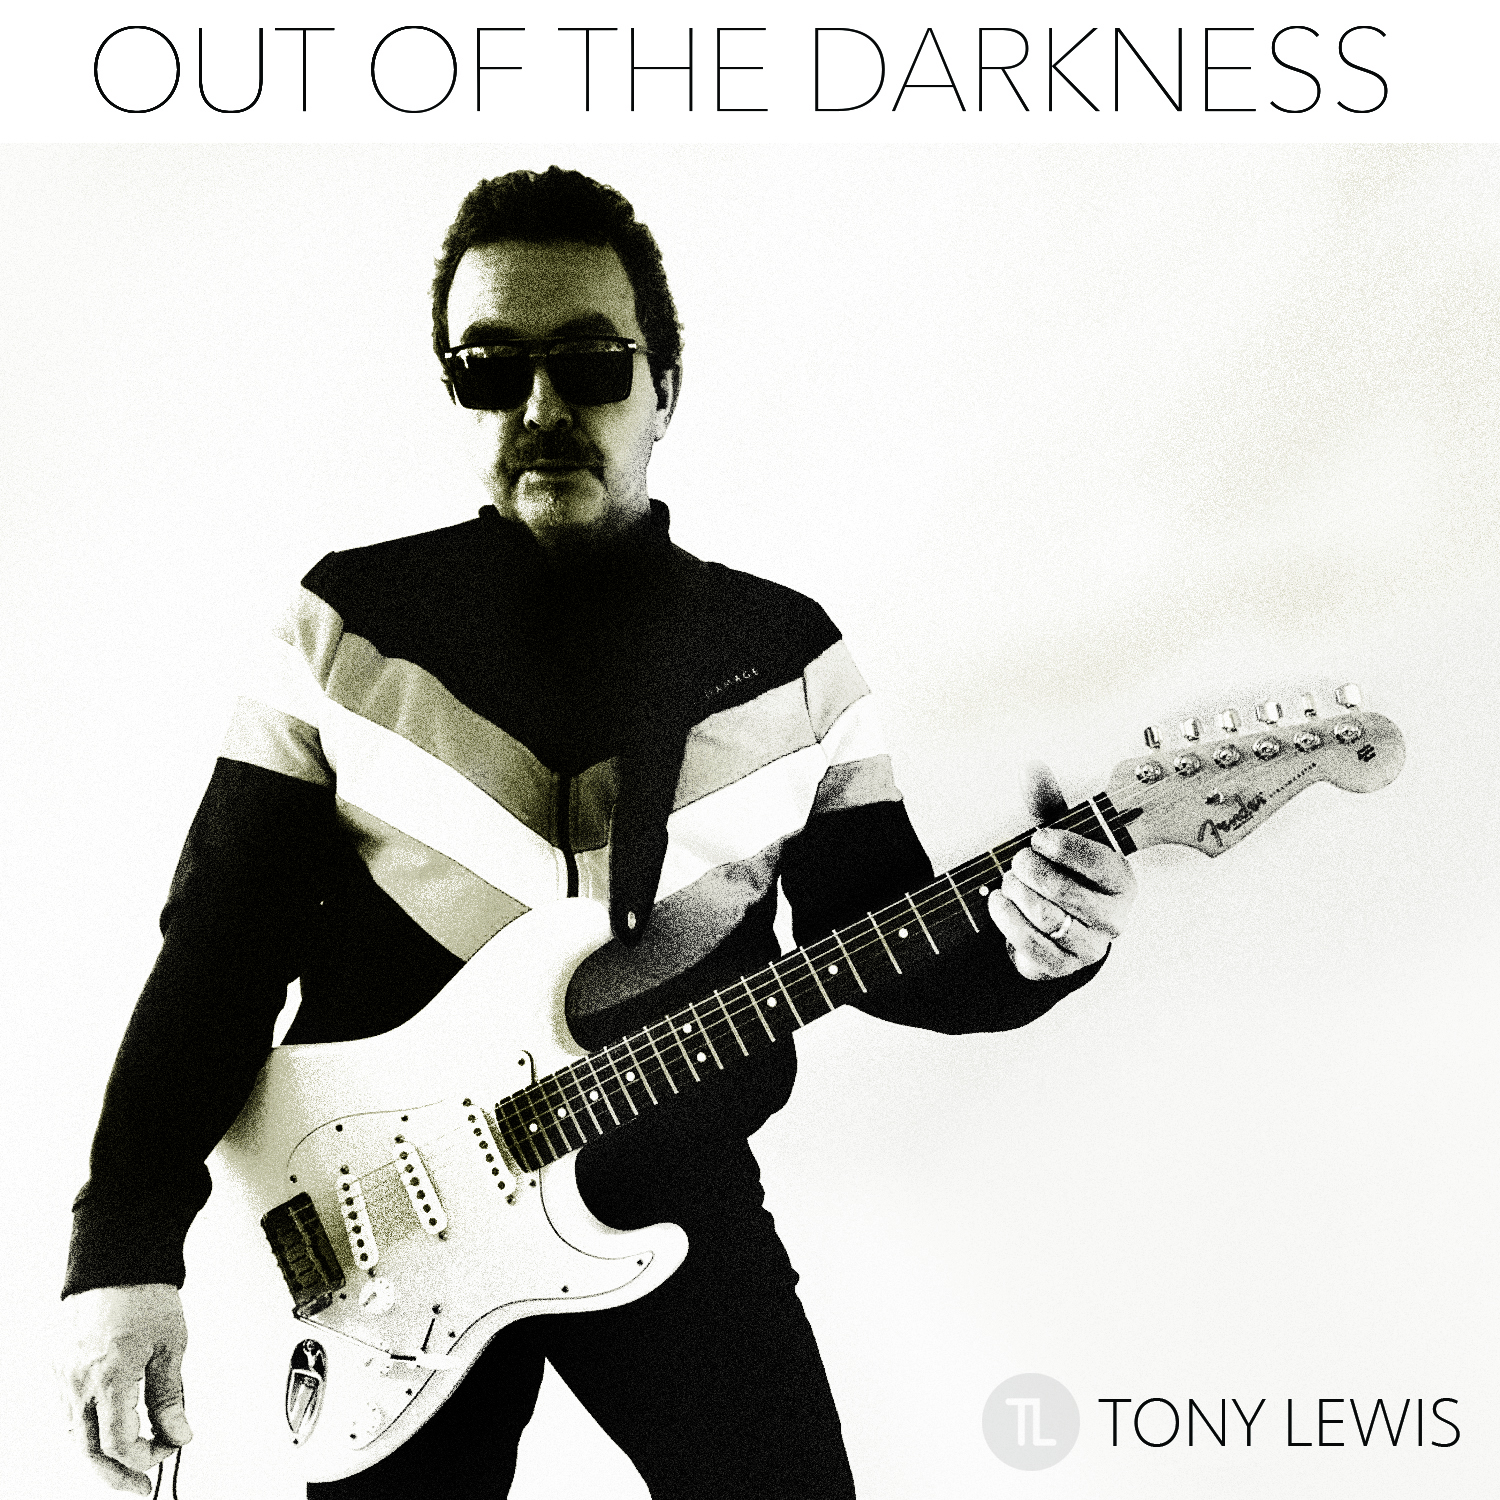 Tony Lewis: Out Of The Darkness